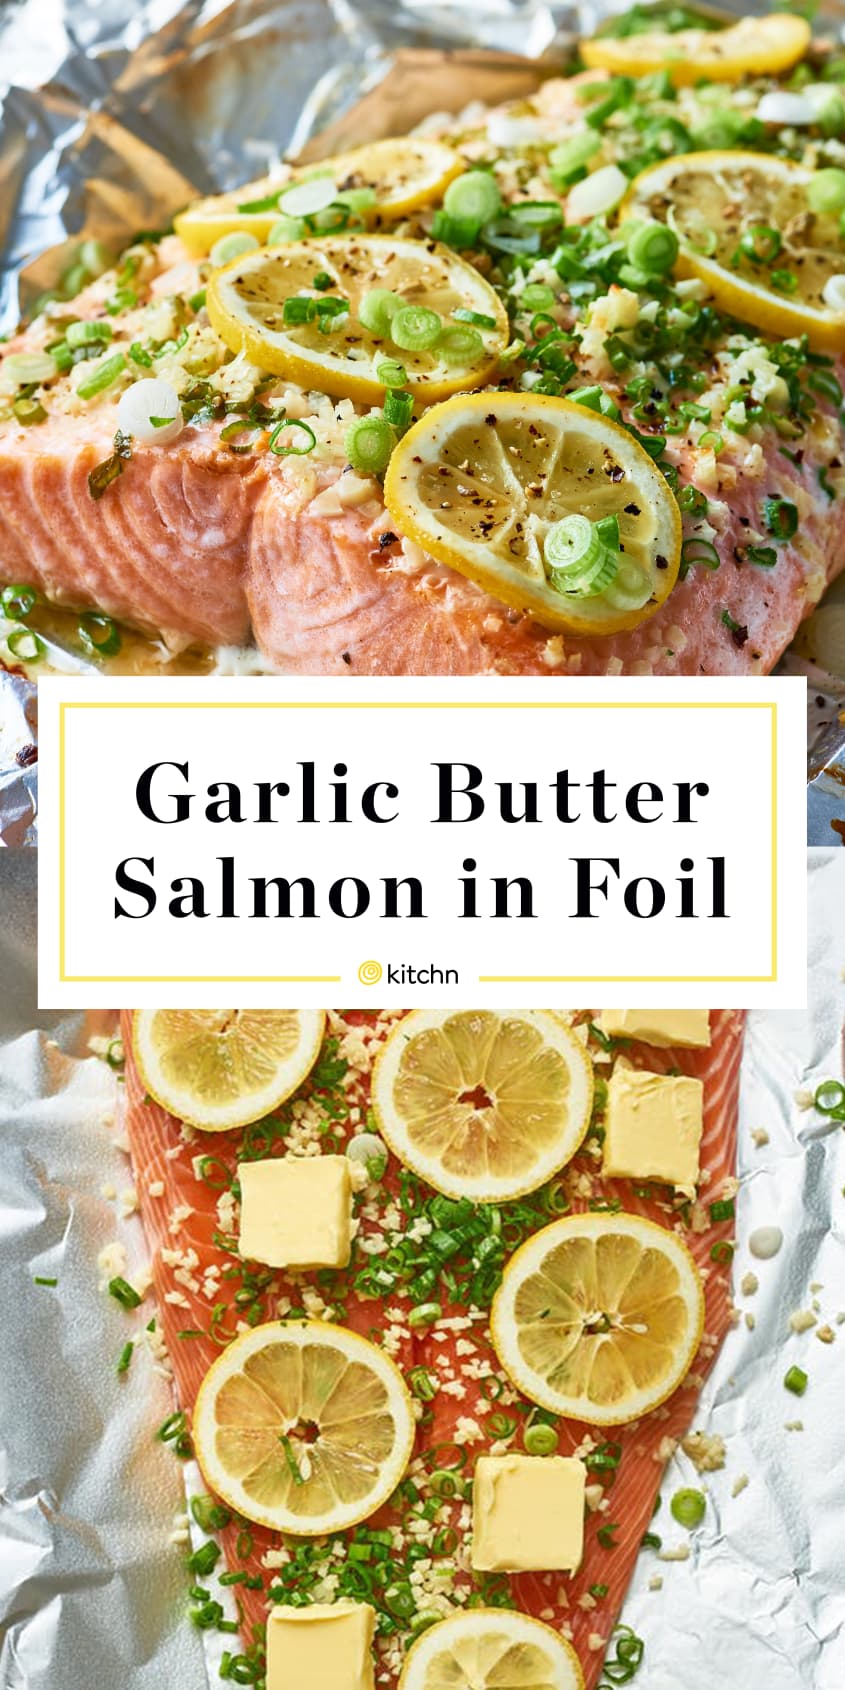 How To Make the Best Garlic Butter Salmon in Foil | Kitchn